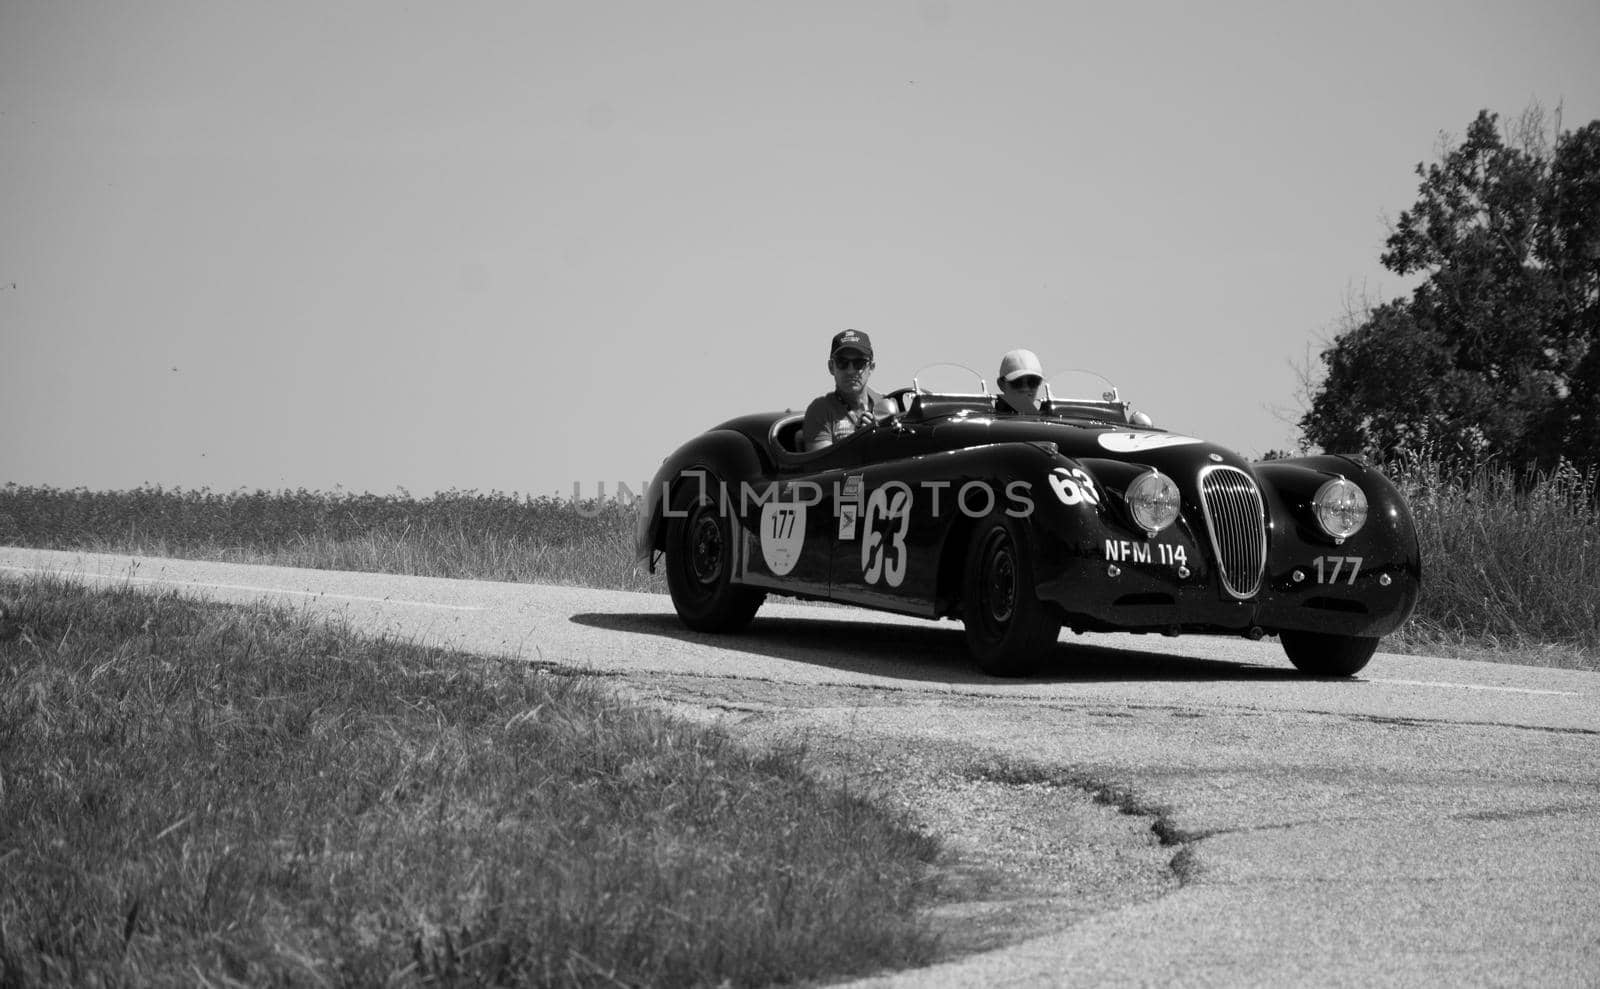 JAGUAR XK120 OTS ROADSTER 1950 on an old racing car in rally Mille Miglia 2022 the famous italian historical race (1927-1957 by massimocampanari